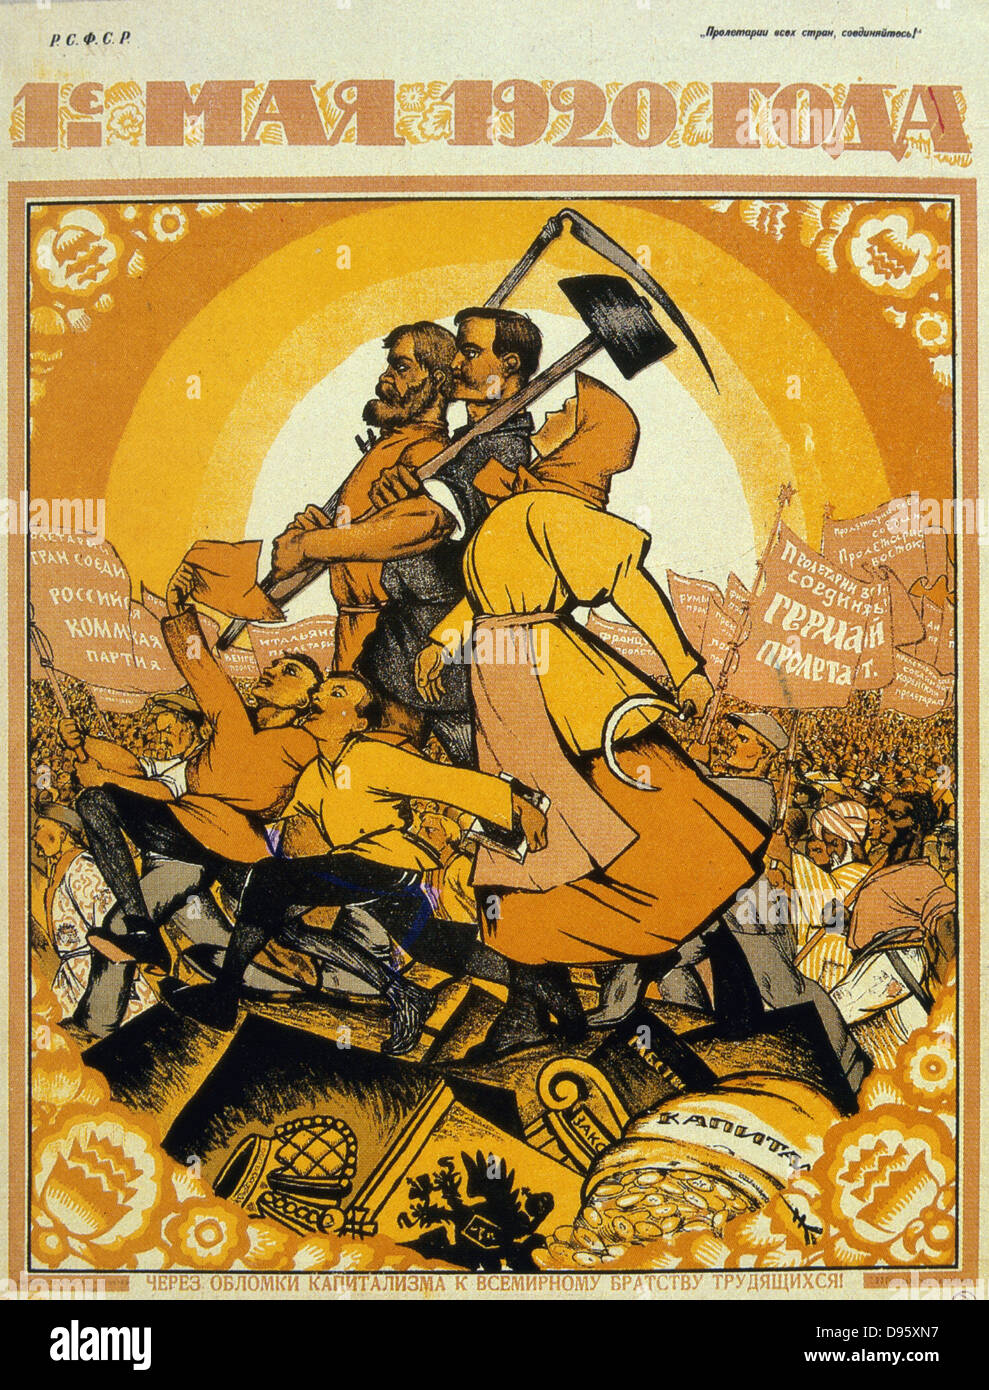 May Day 1920. On the ruins of capitalism the fraternity of peasants and workers marches against the peoples of the world. Artist, Nicolas Kotcherguine.  Soviet Social Realism. Stock Photo